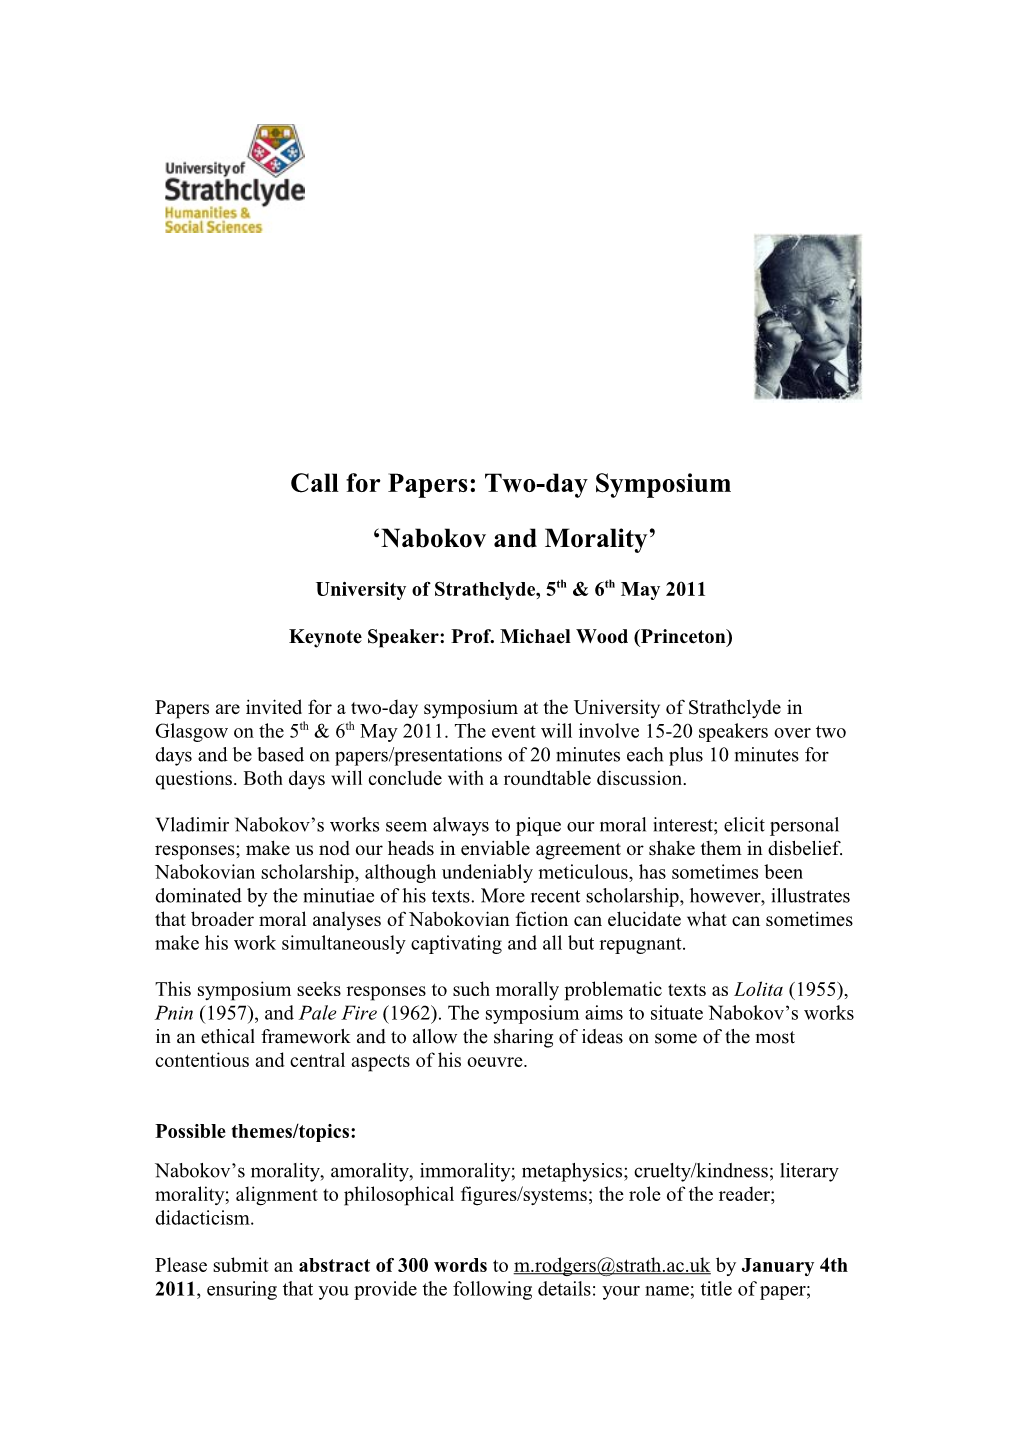 Call for Papers: Two-Day Symposium